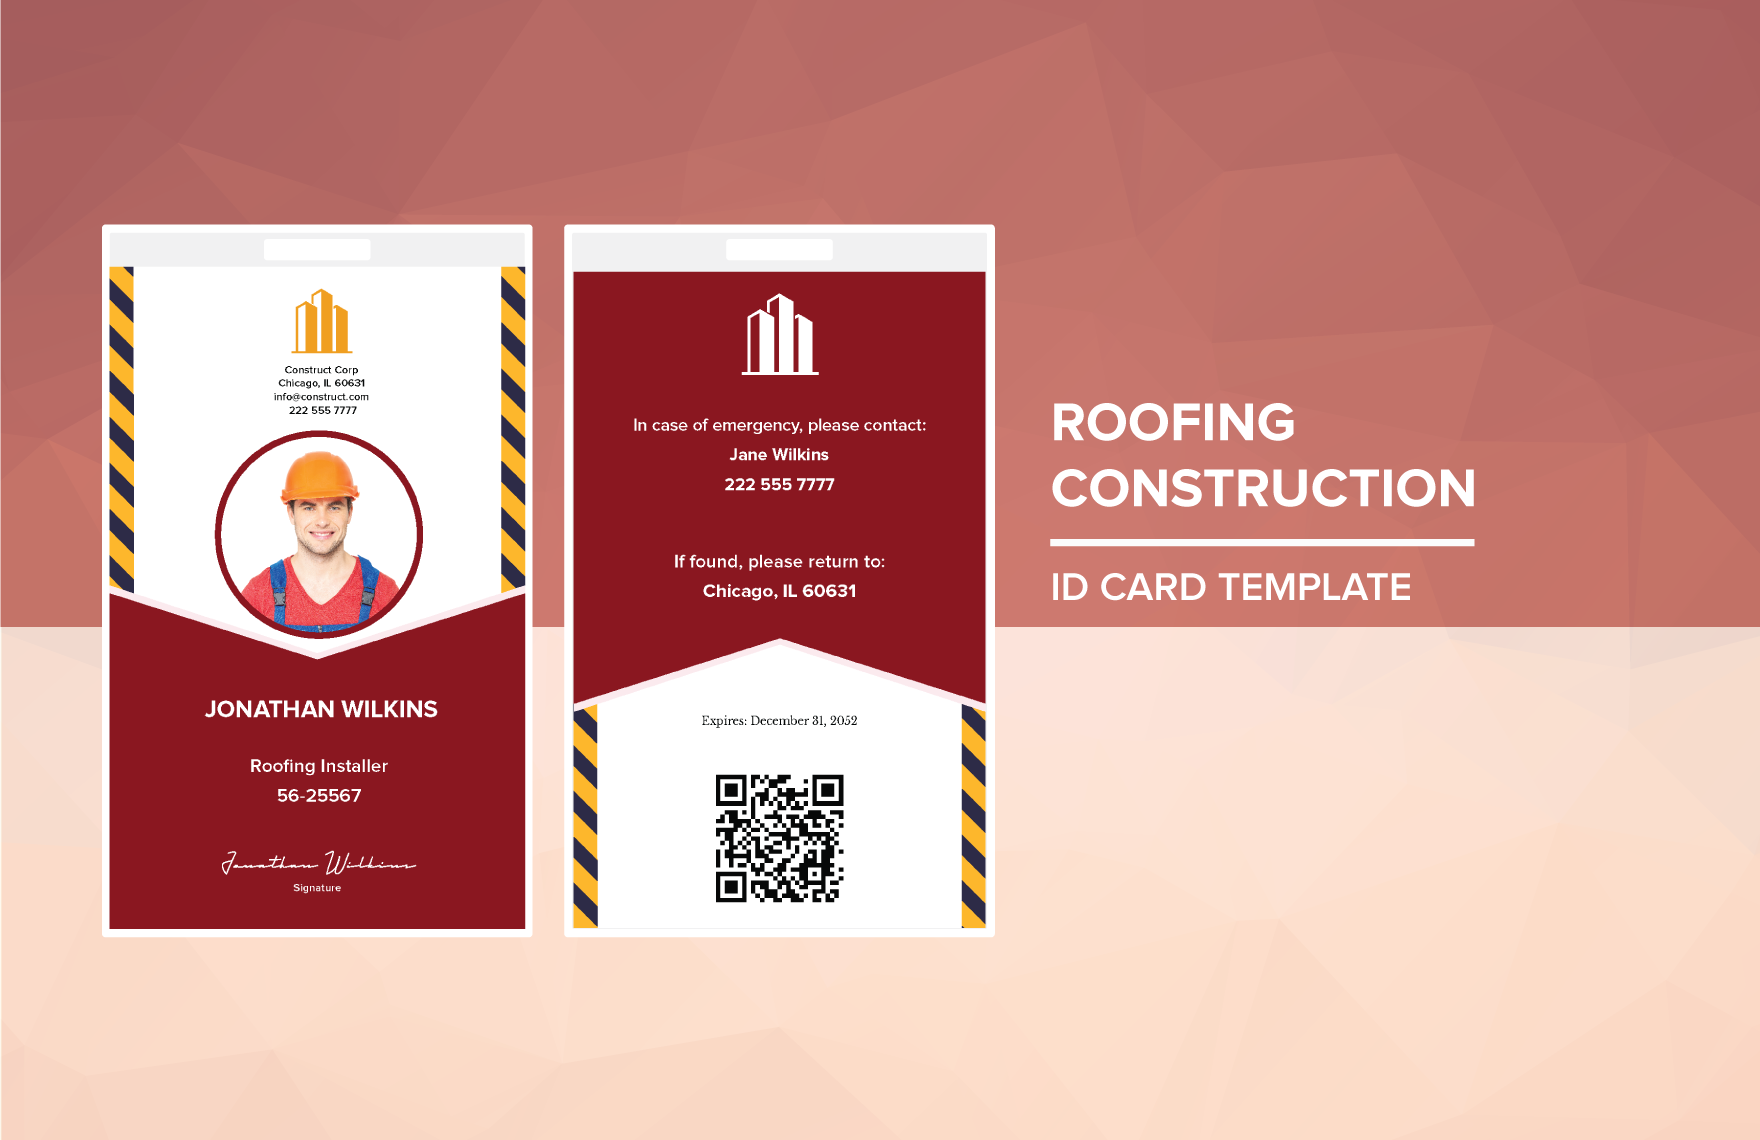 Roofing Construction ID Card